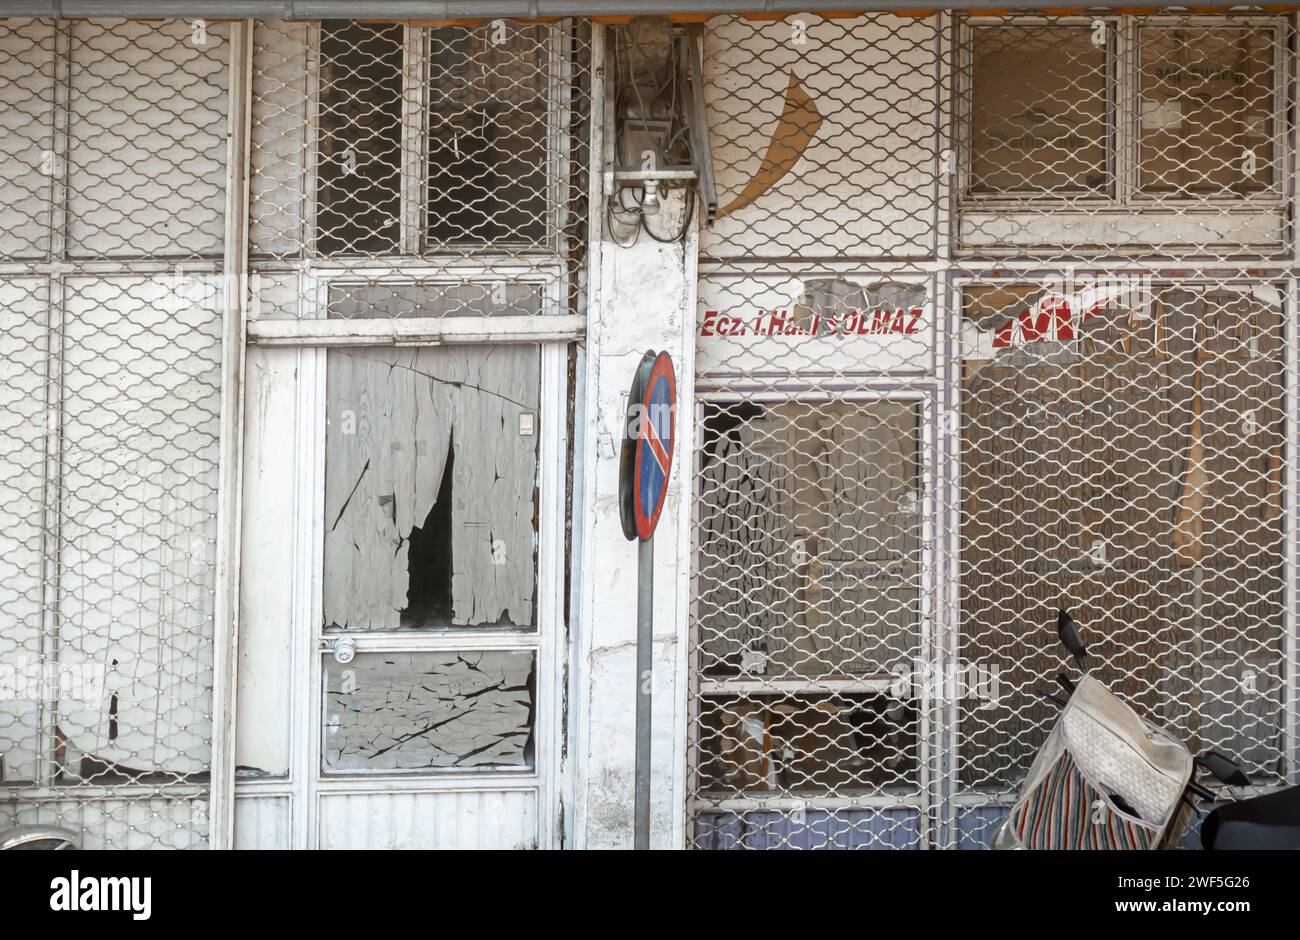 Shabby closed business store front building, metal grid closed with holes Sanliurfa Turkey Stock Photo